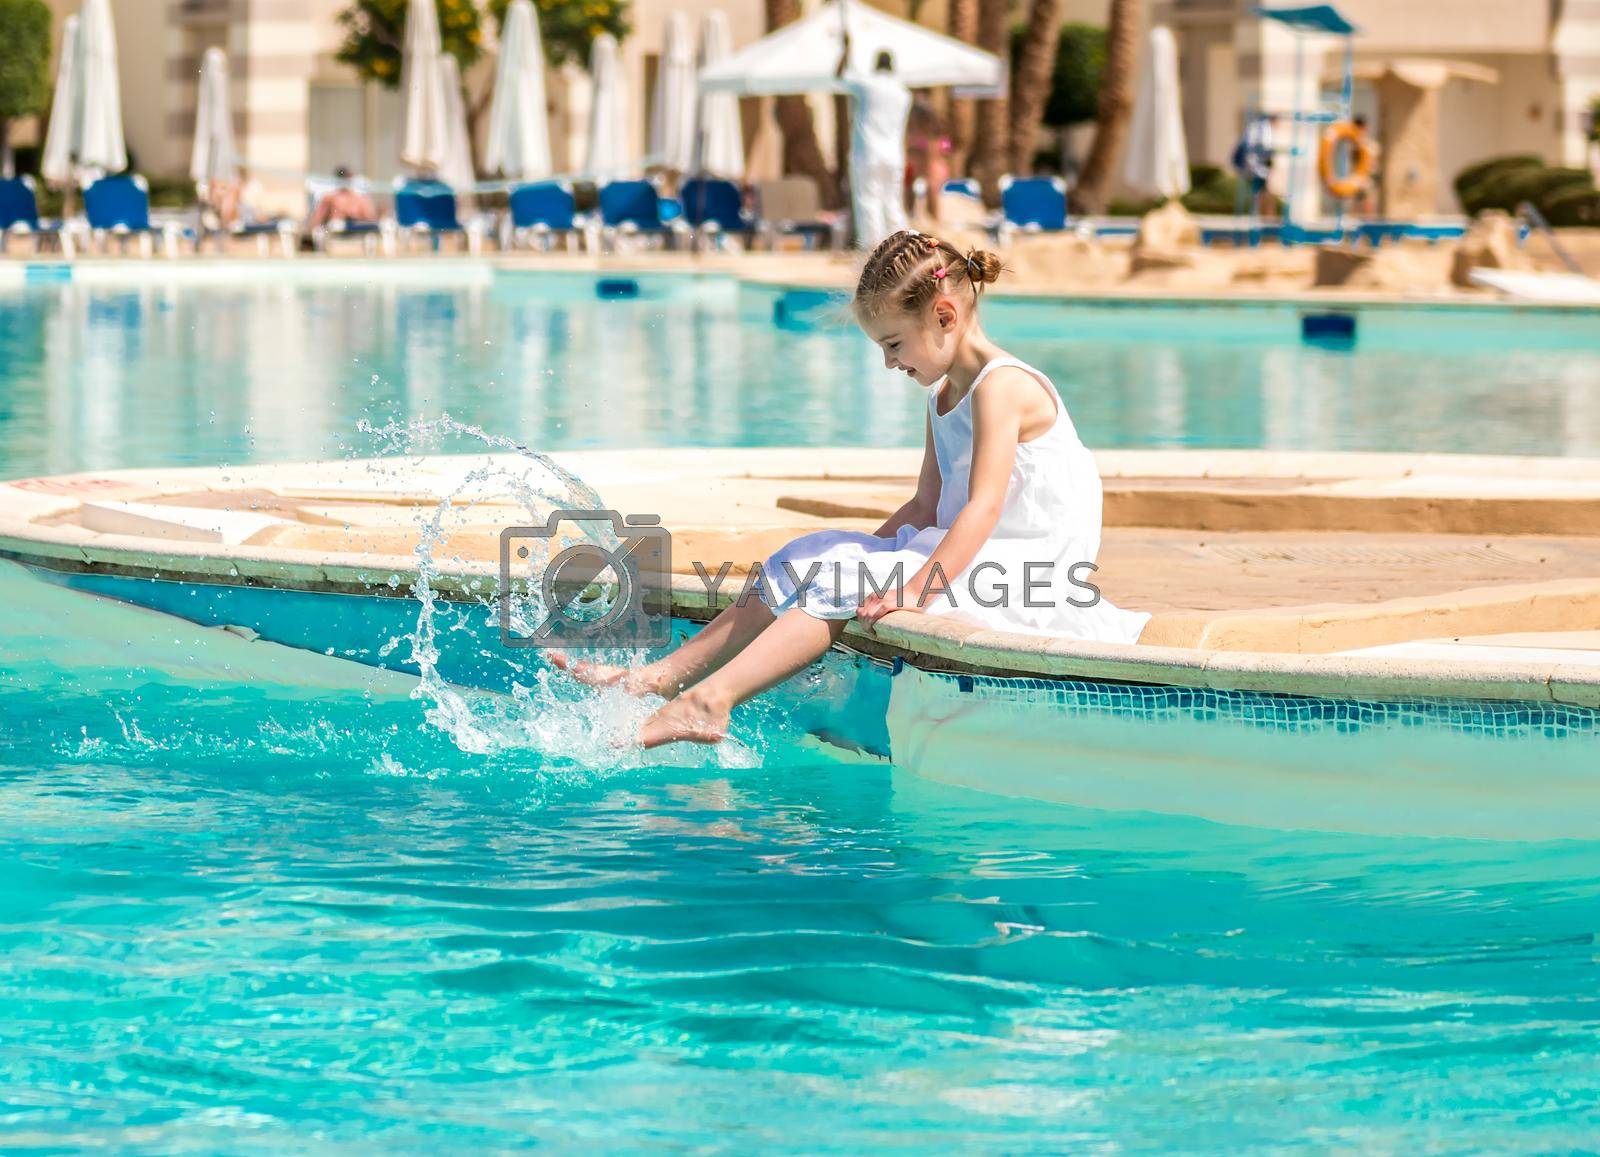 Royalty free image of Kid doing activities by the pool by tan4ikk1